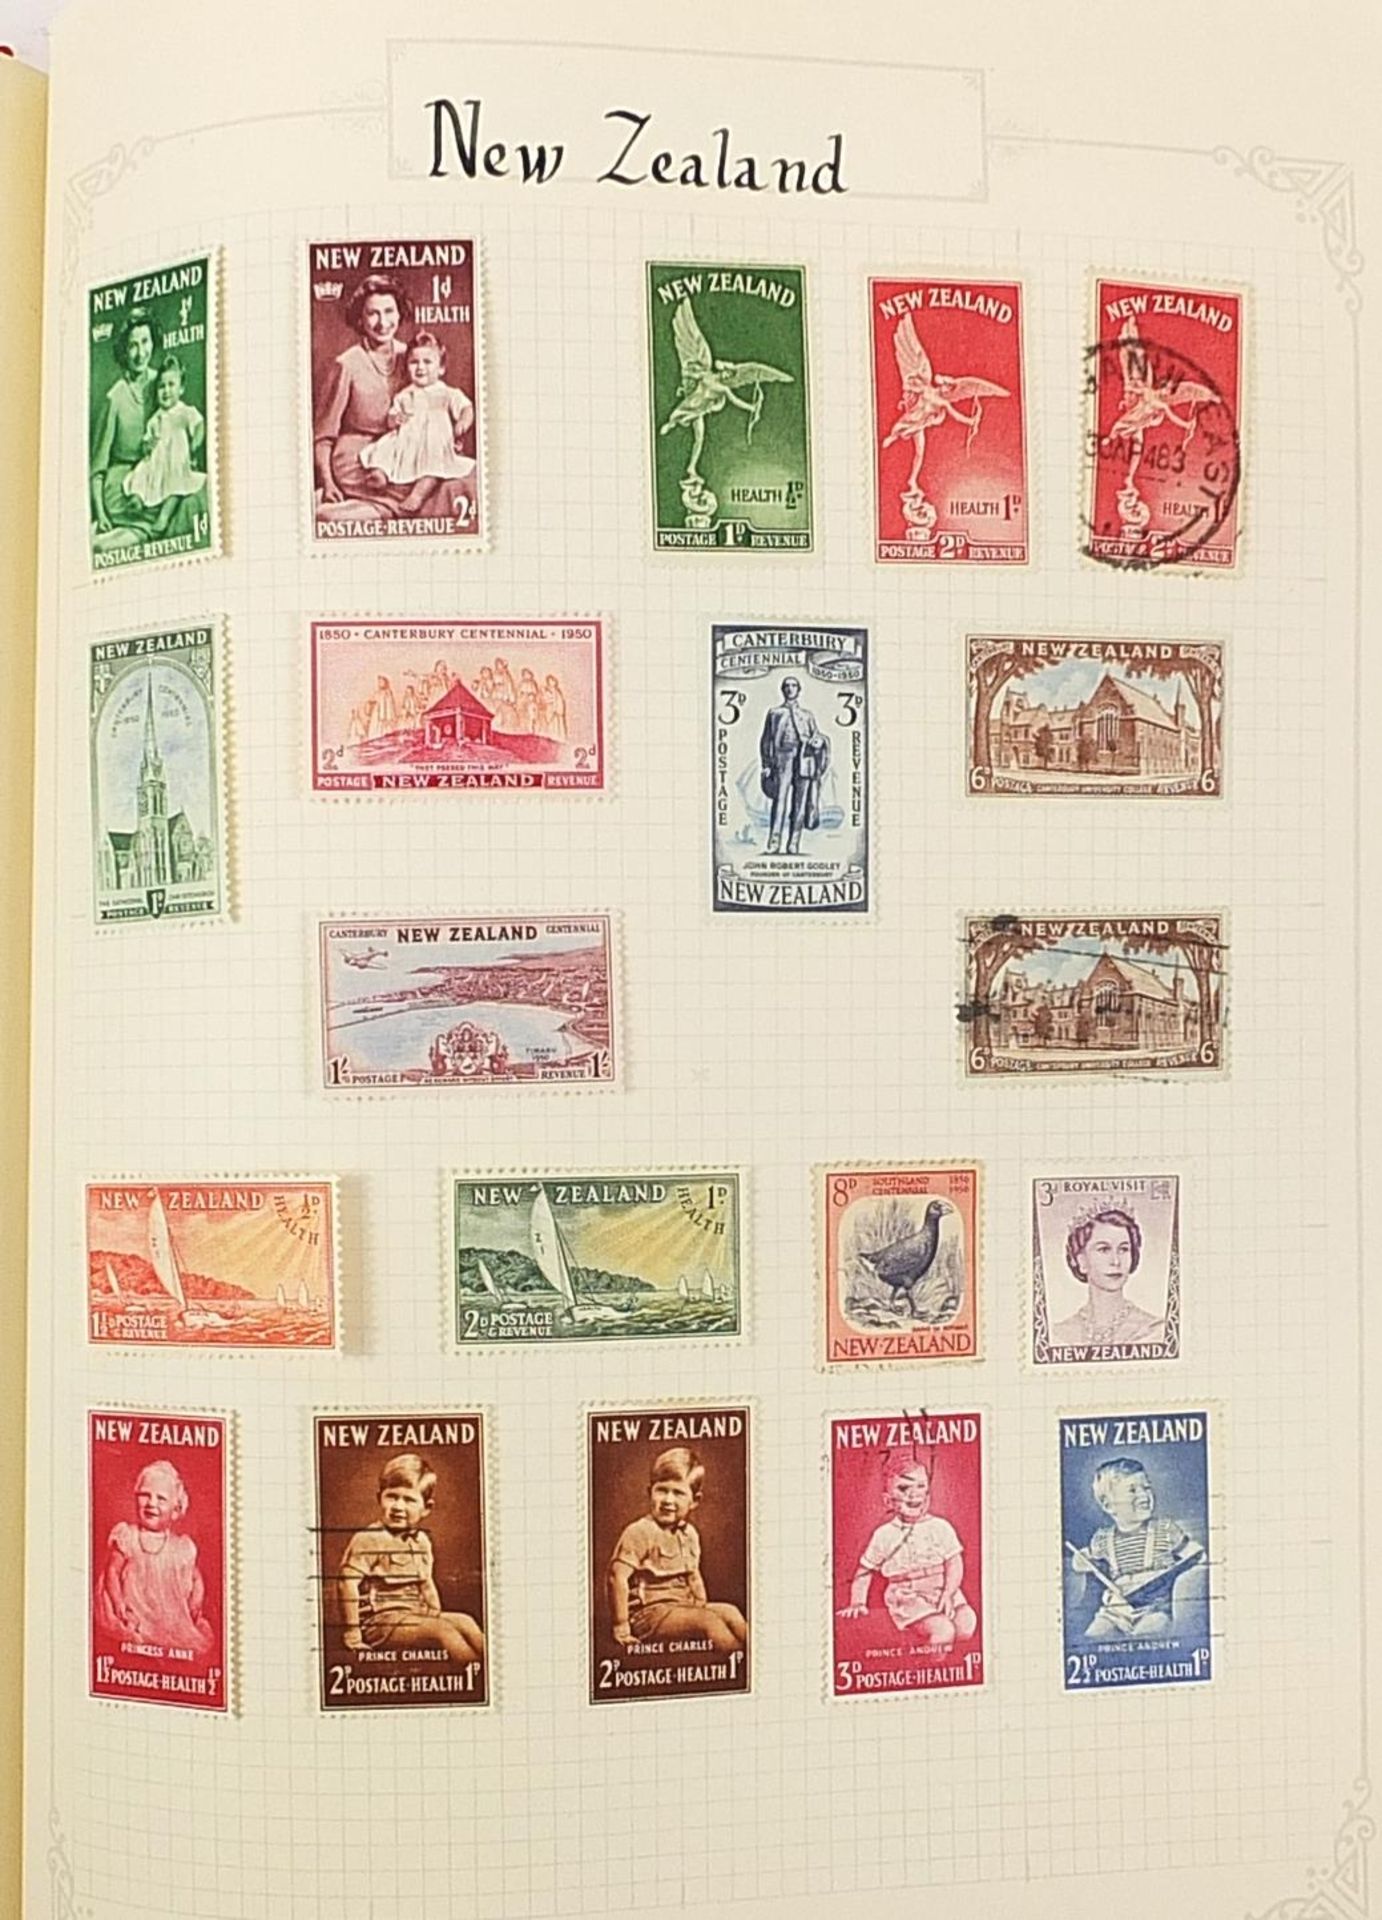 Australian and Canadian stamps arranged in an album